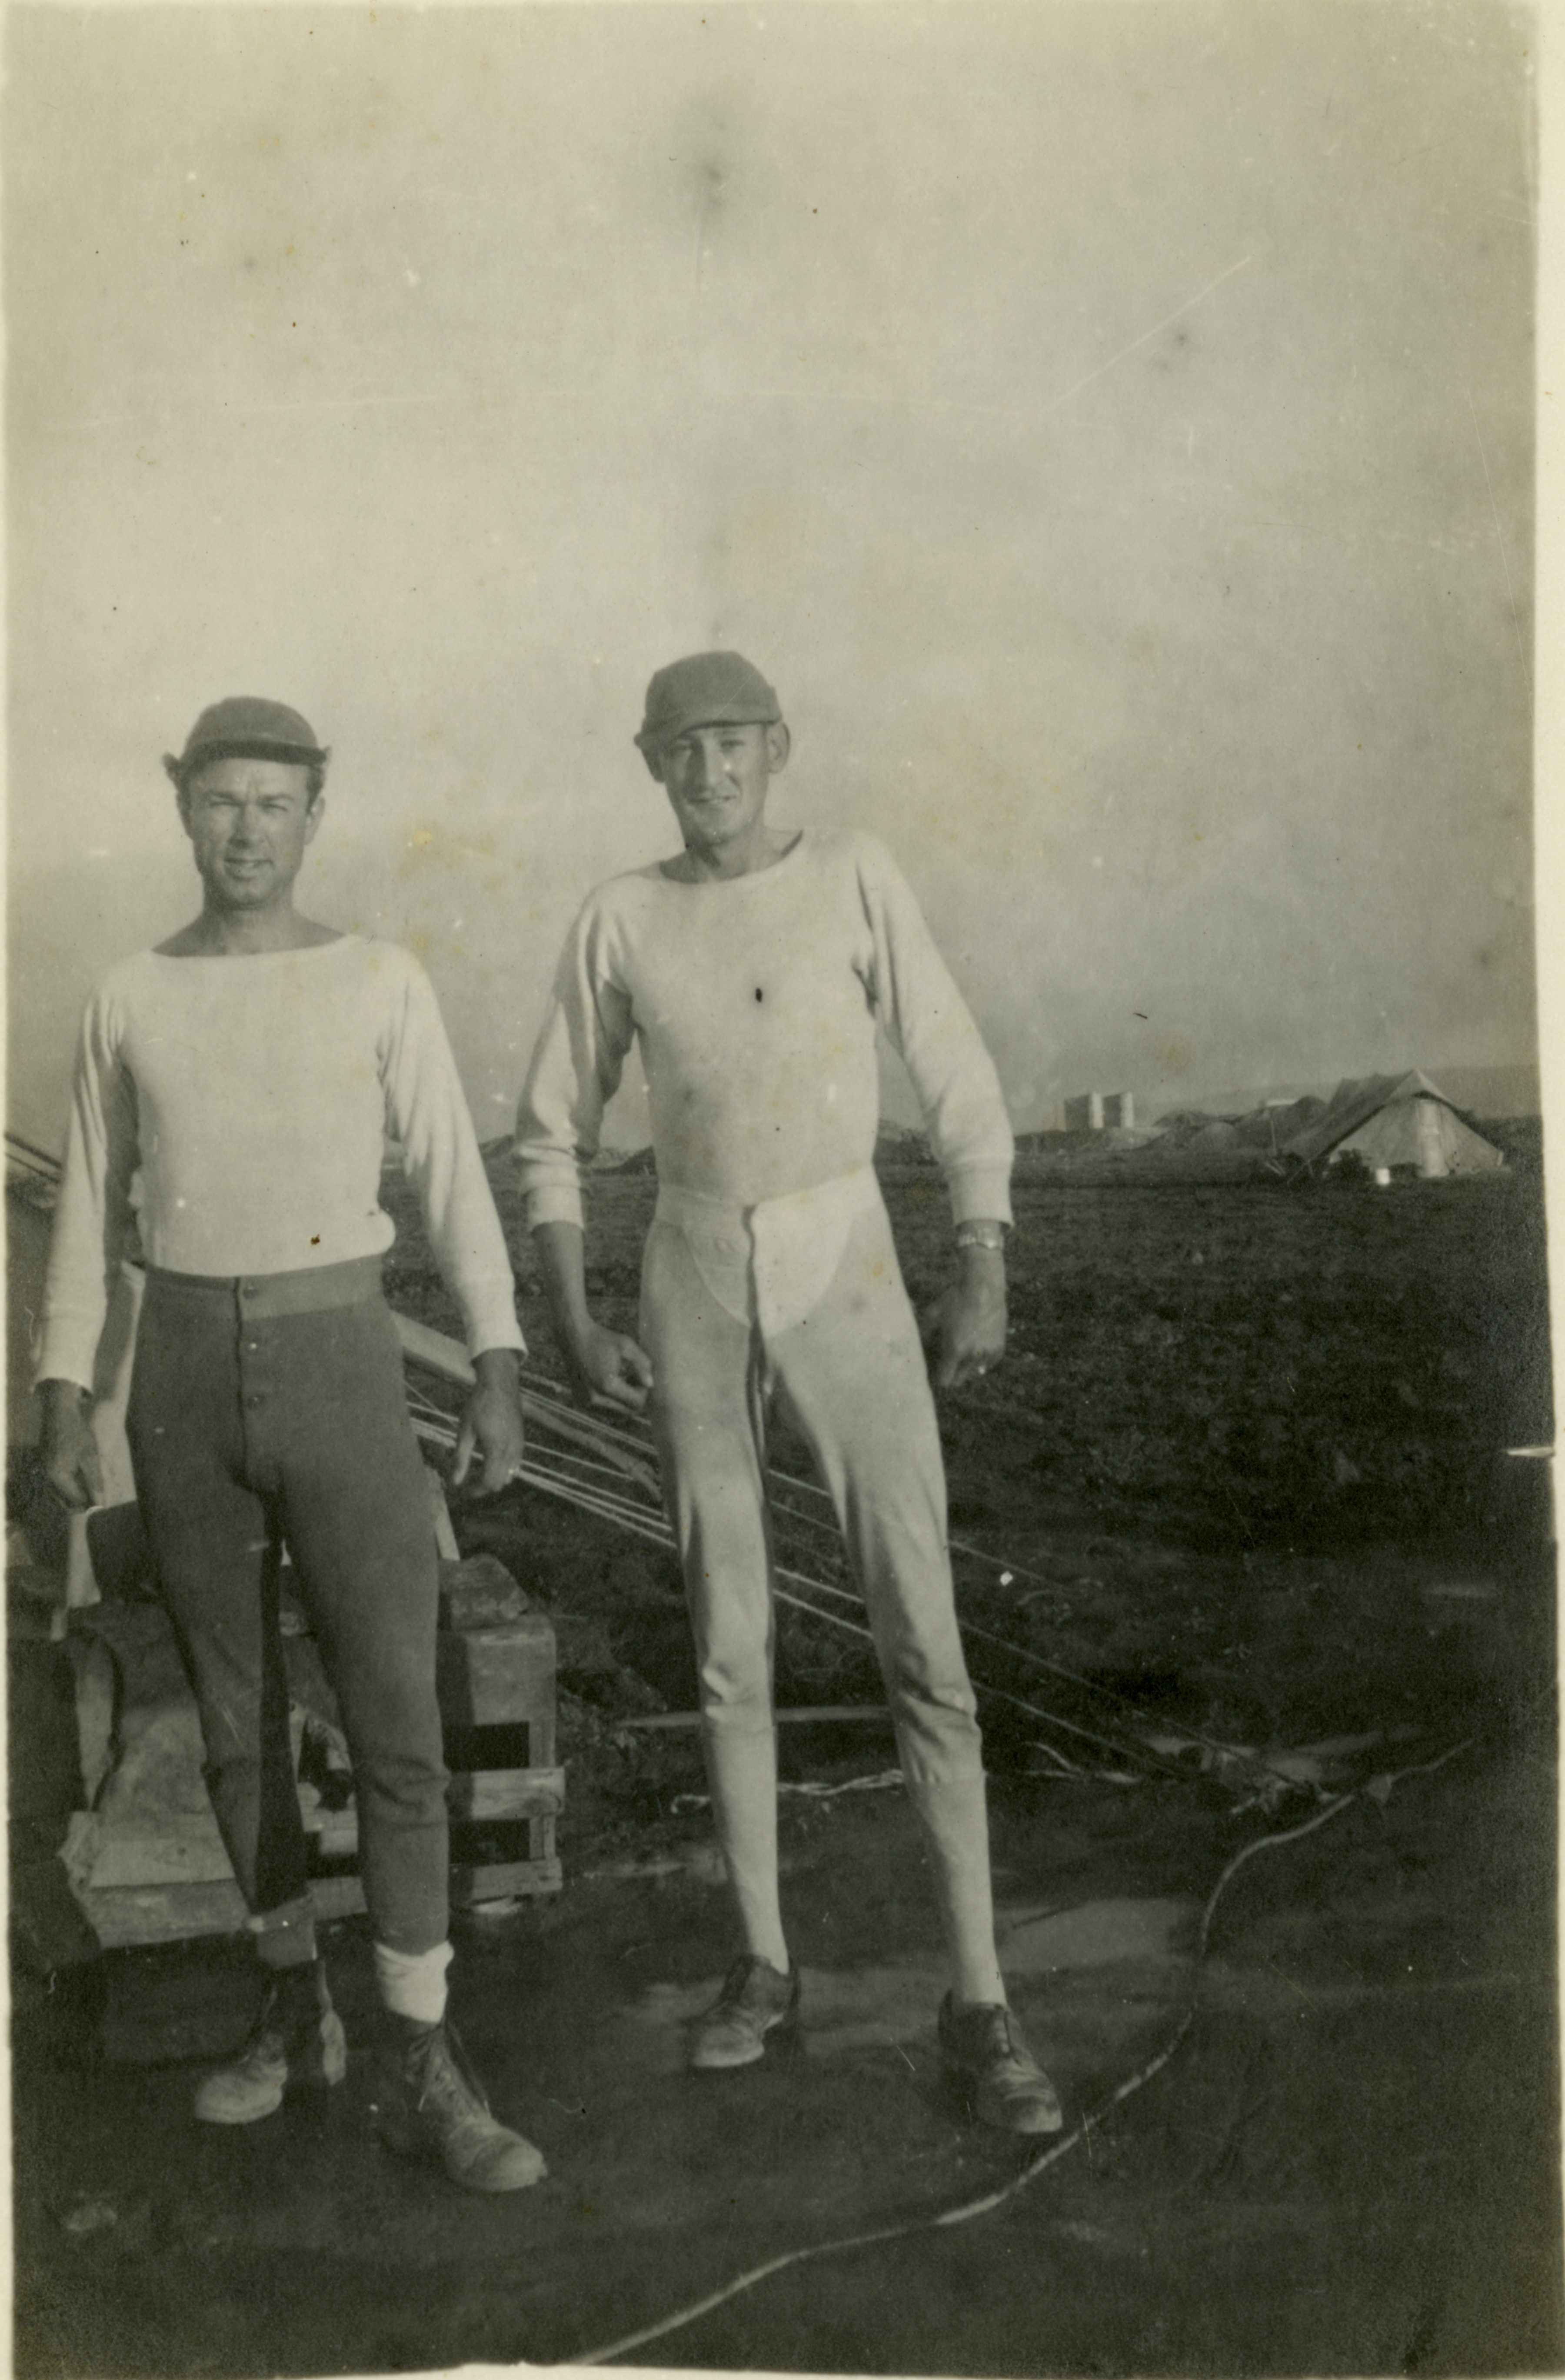 United States servicemen Harm and Kinney in long underwear, location  unknown, 1941-45